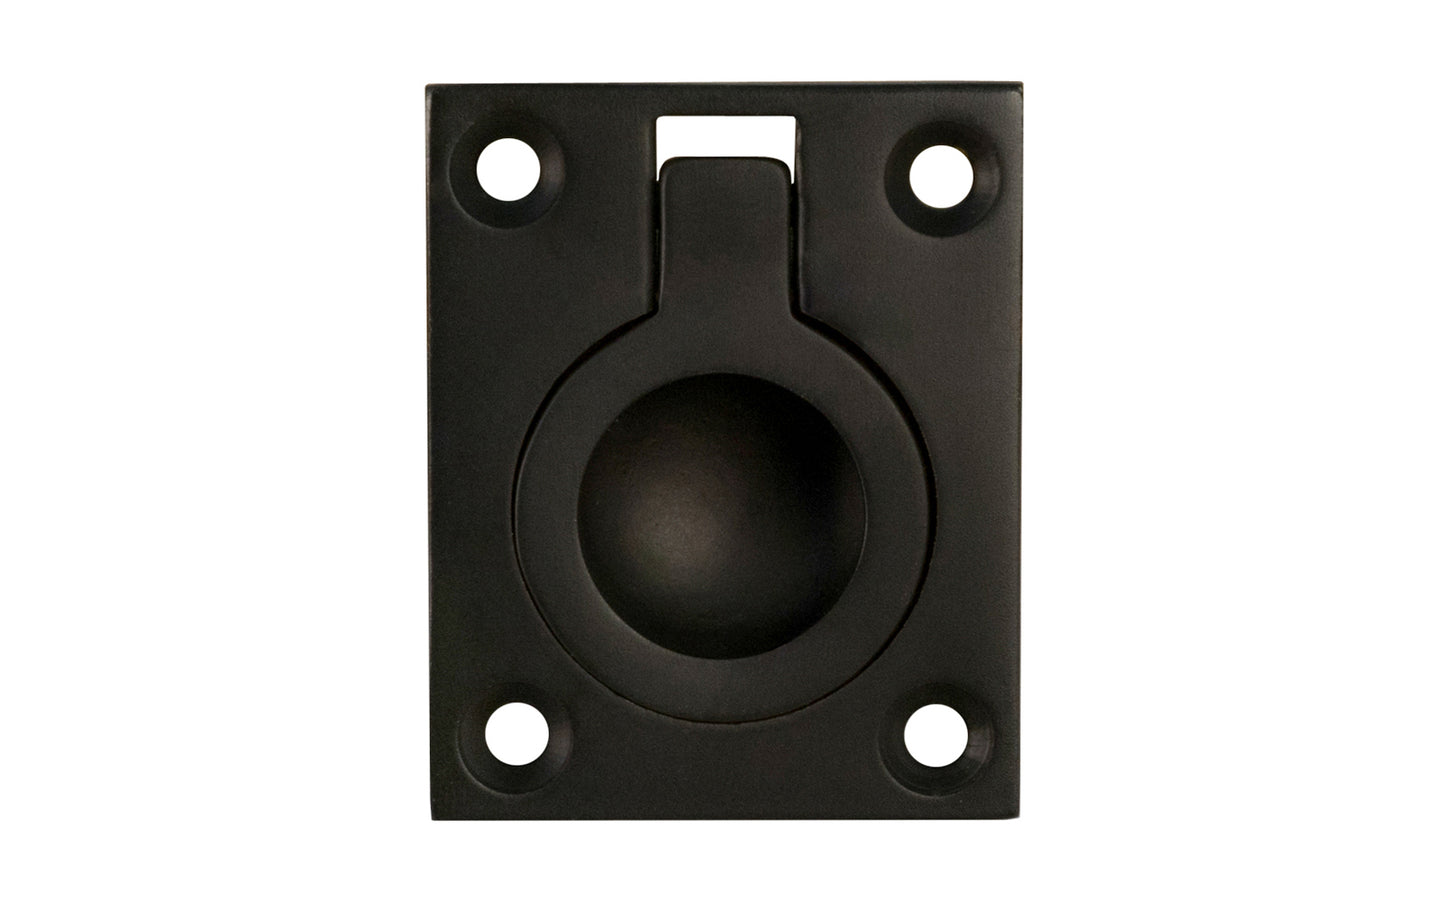 A classic & traditional flush mount recessed ring pull. High quality solid brass, this finger ring pull is thick & stout for durability. For sliding cabinet doors, trap doors, hatches, small boxes, etc. 1-3/4" high x 1-7/16" wide. Oil Rubbed Bronze Finish.